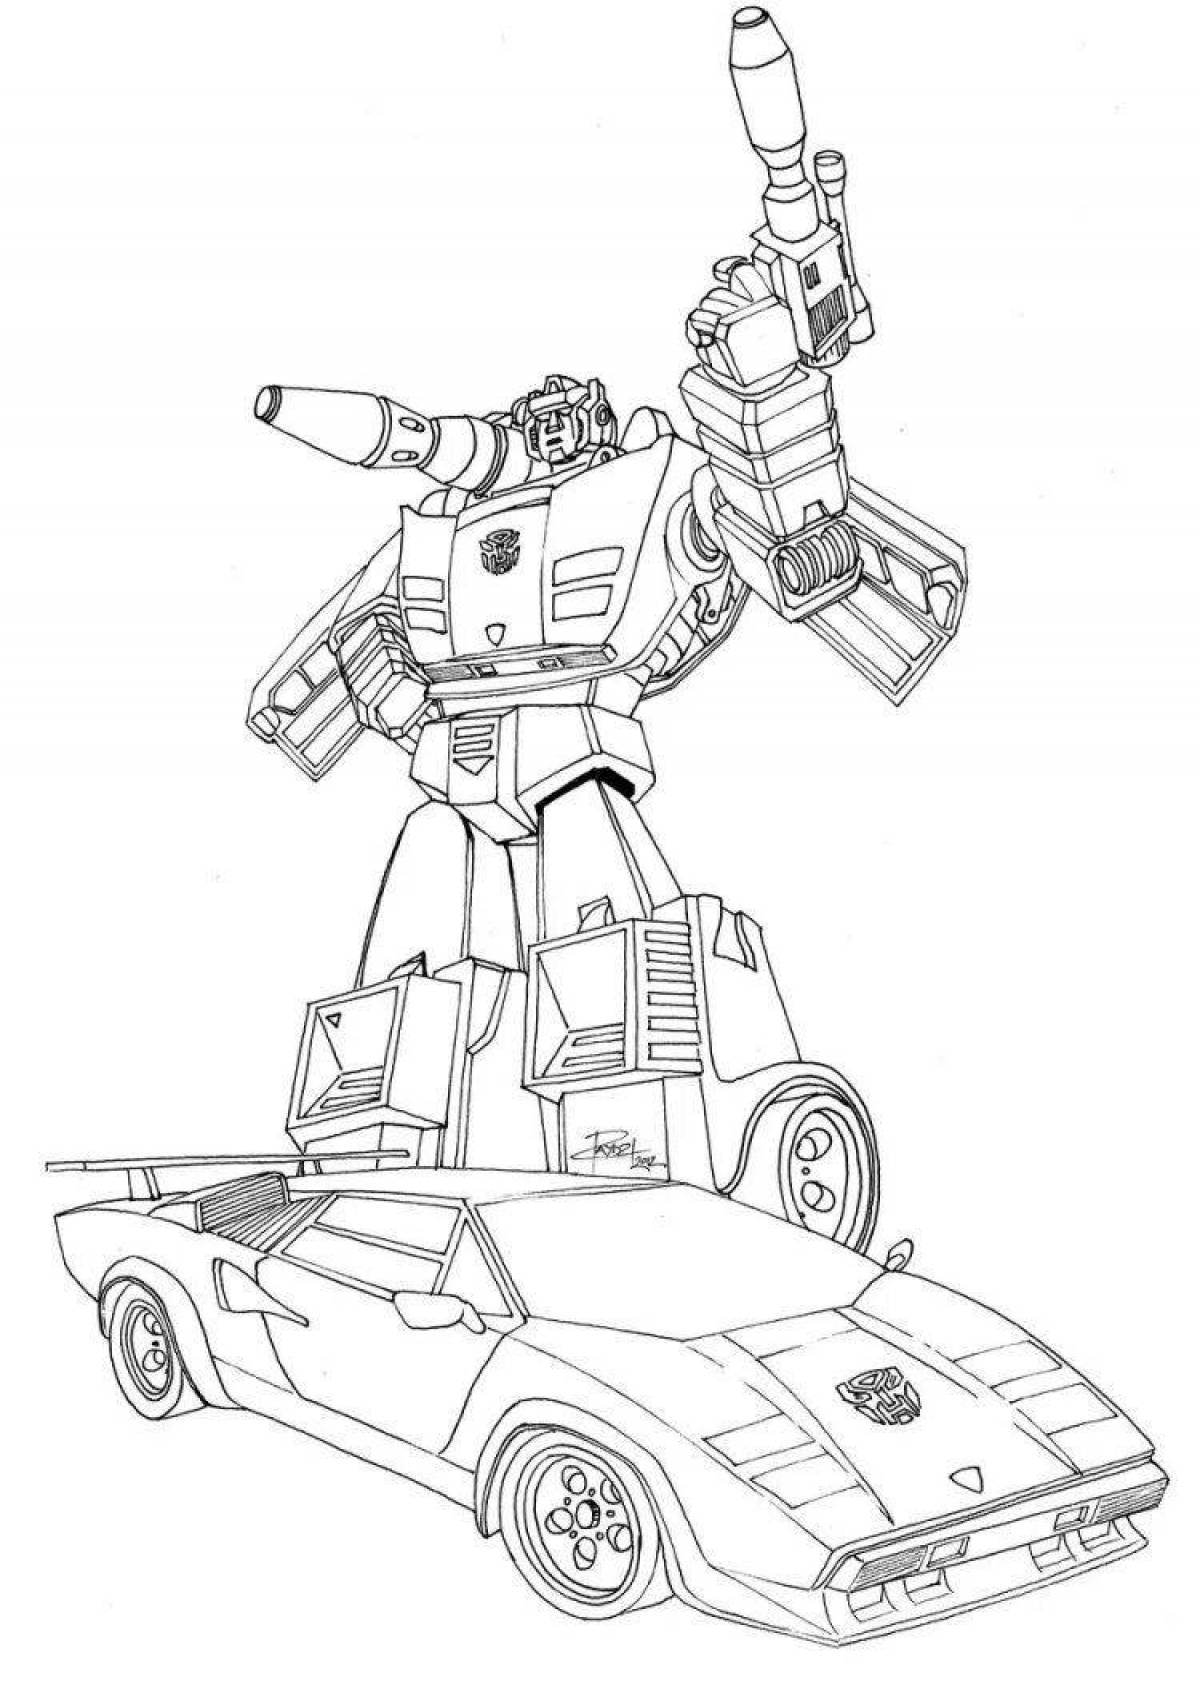 Luxury police robot coloring page